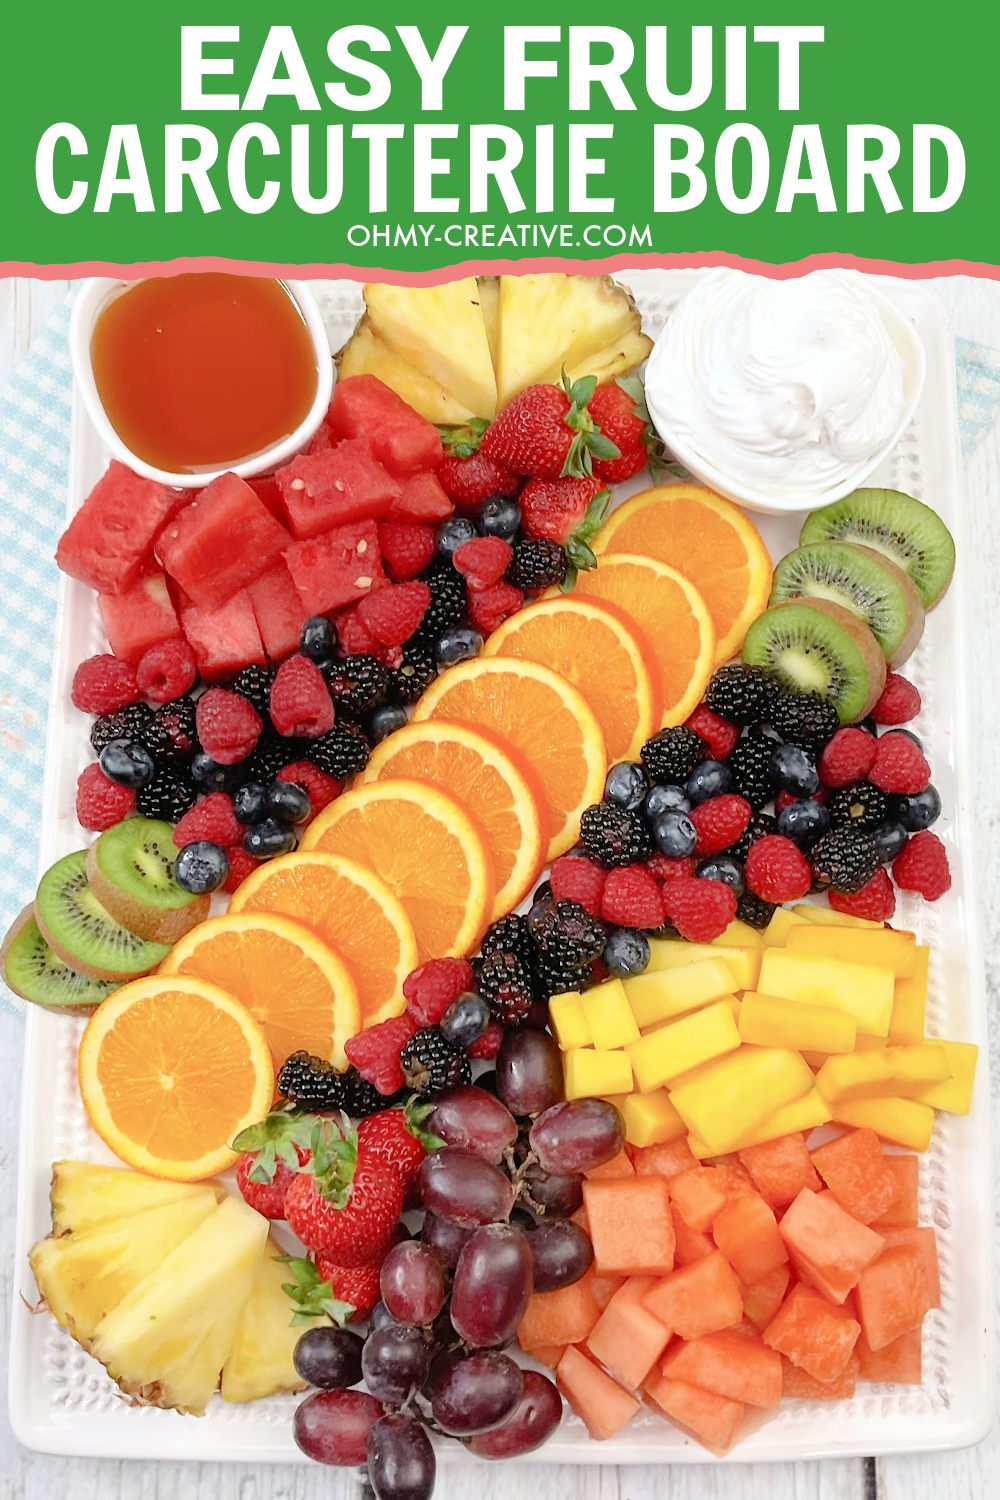 Easy Fruit Party Platter with oranges, berries, kiwi, pineapple and more with dipping sauces.